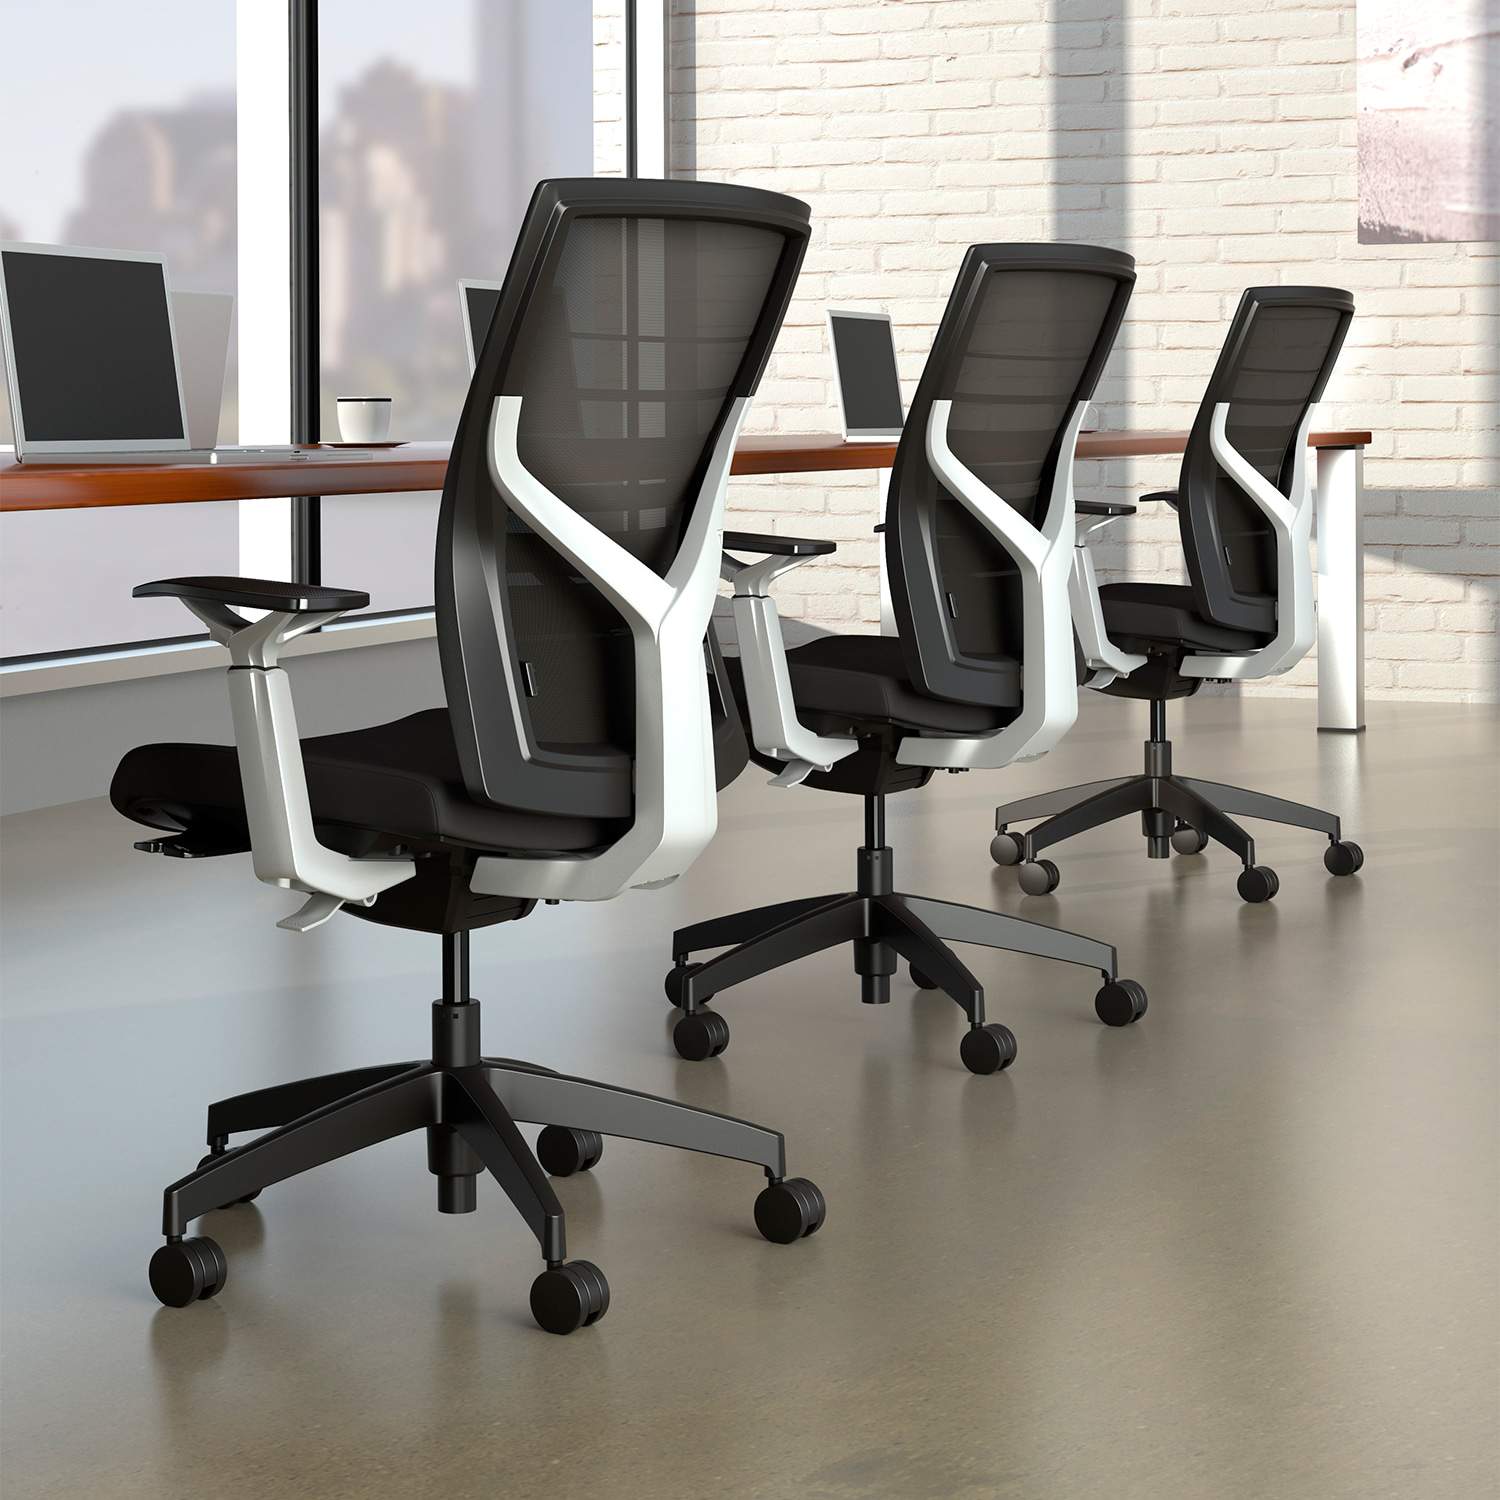 Finding the Best Ergonomic Office Chair  Systems Furniture